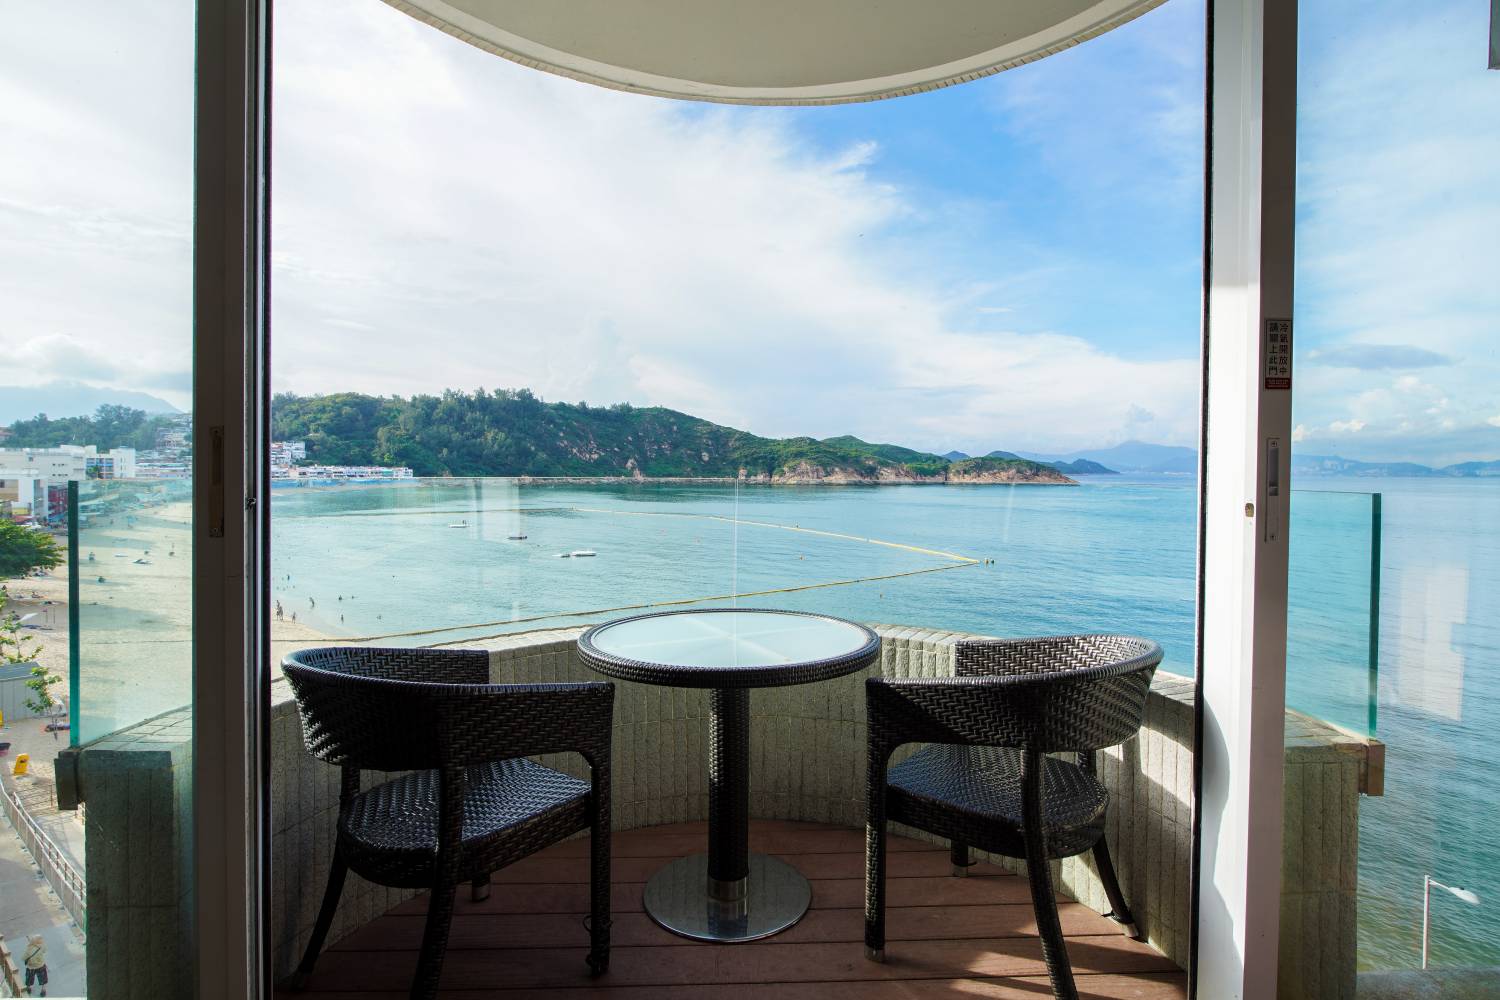 【Happy Summer Staycation】Ocean View Room Accommodation + Seaview Balcony + Breakfast + Seafood Dinner｜ The Warwick Hotel